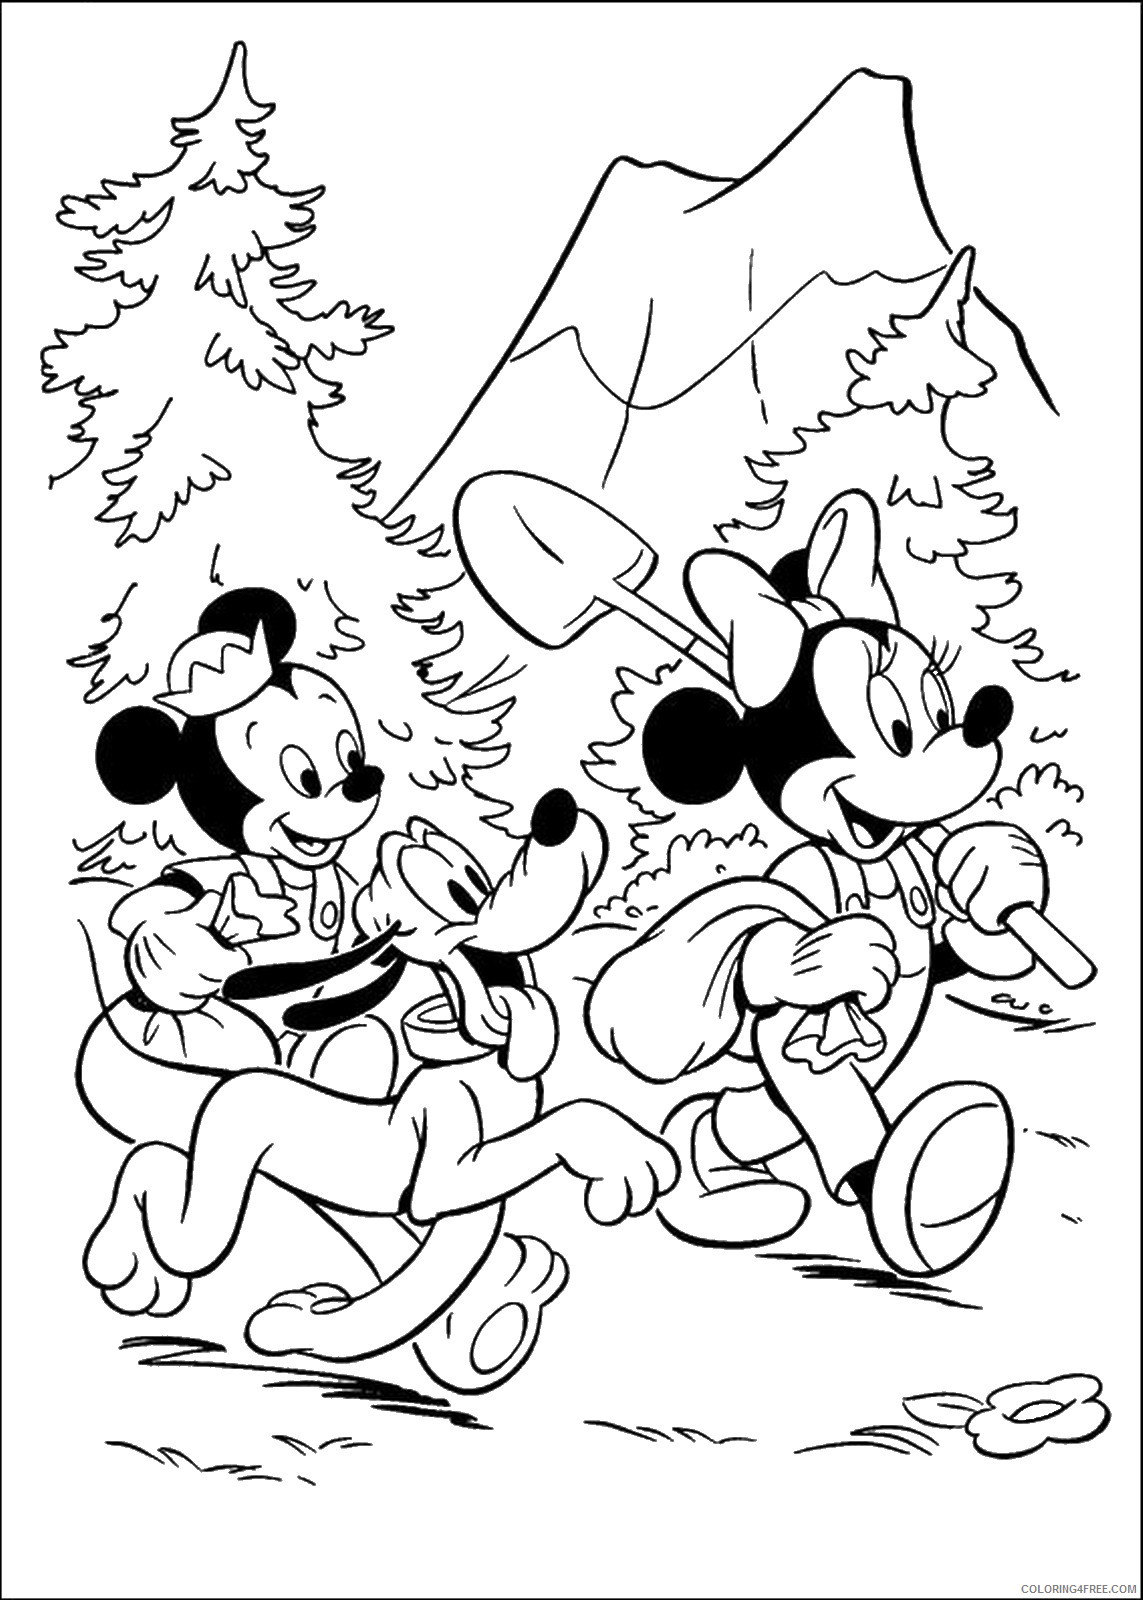 Pluto Coloring Pages Cartoons pluto_cl_26 Printable 2020 4936 Coloring4free